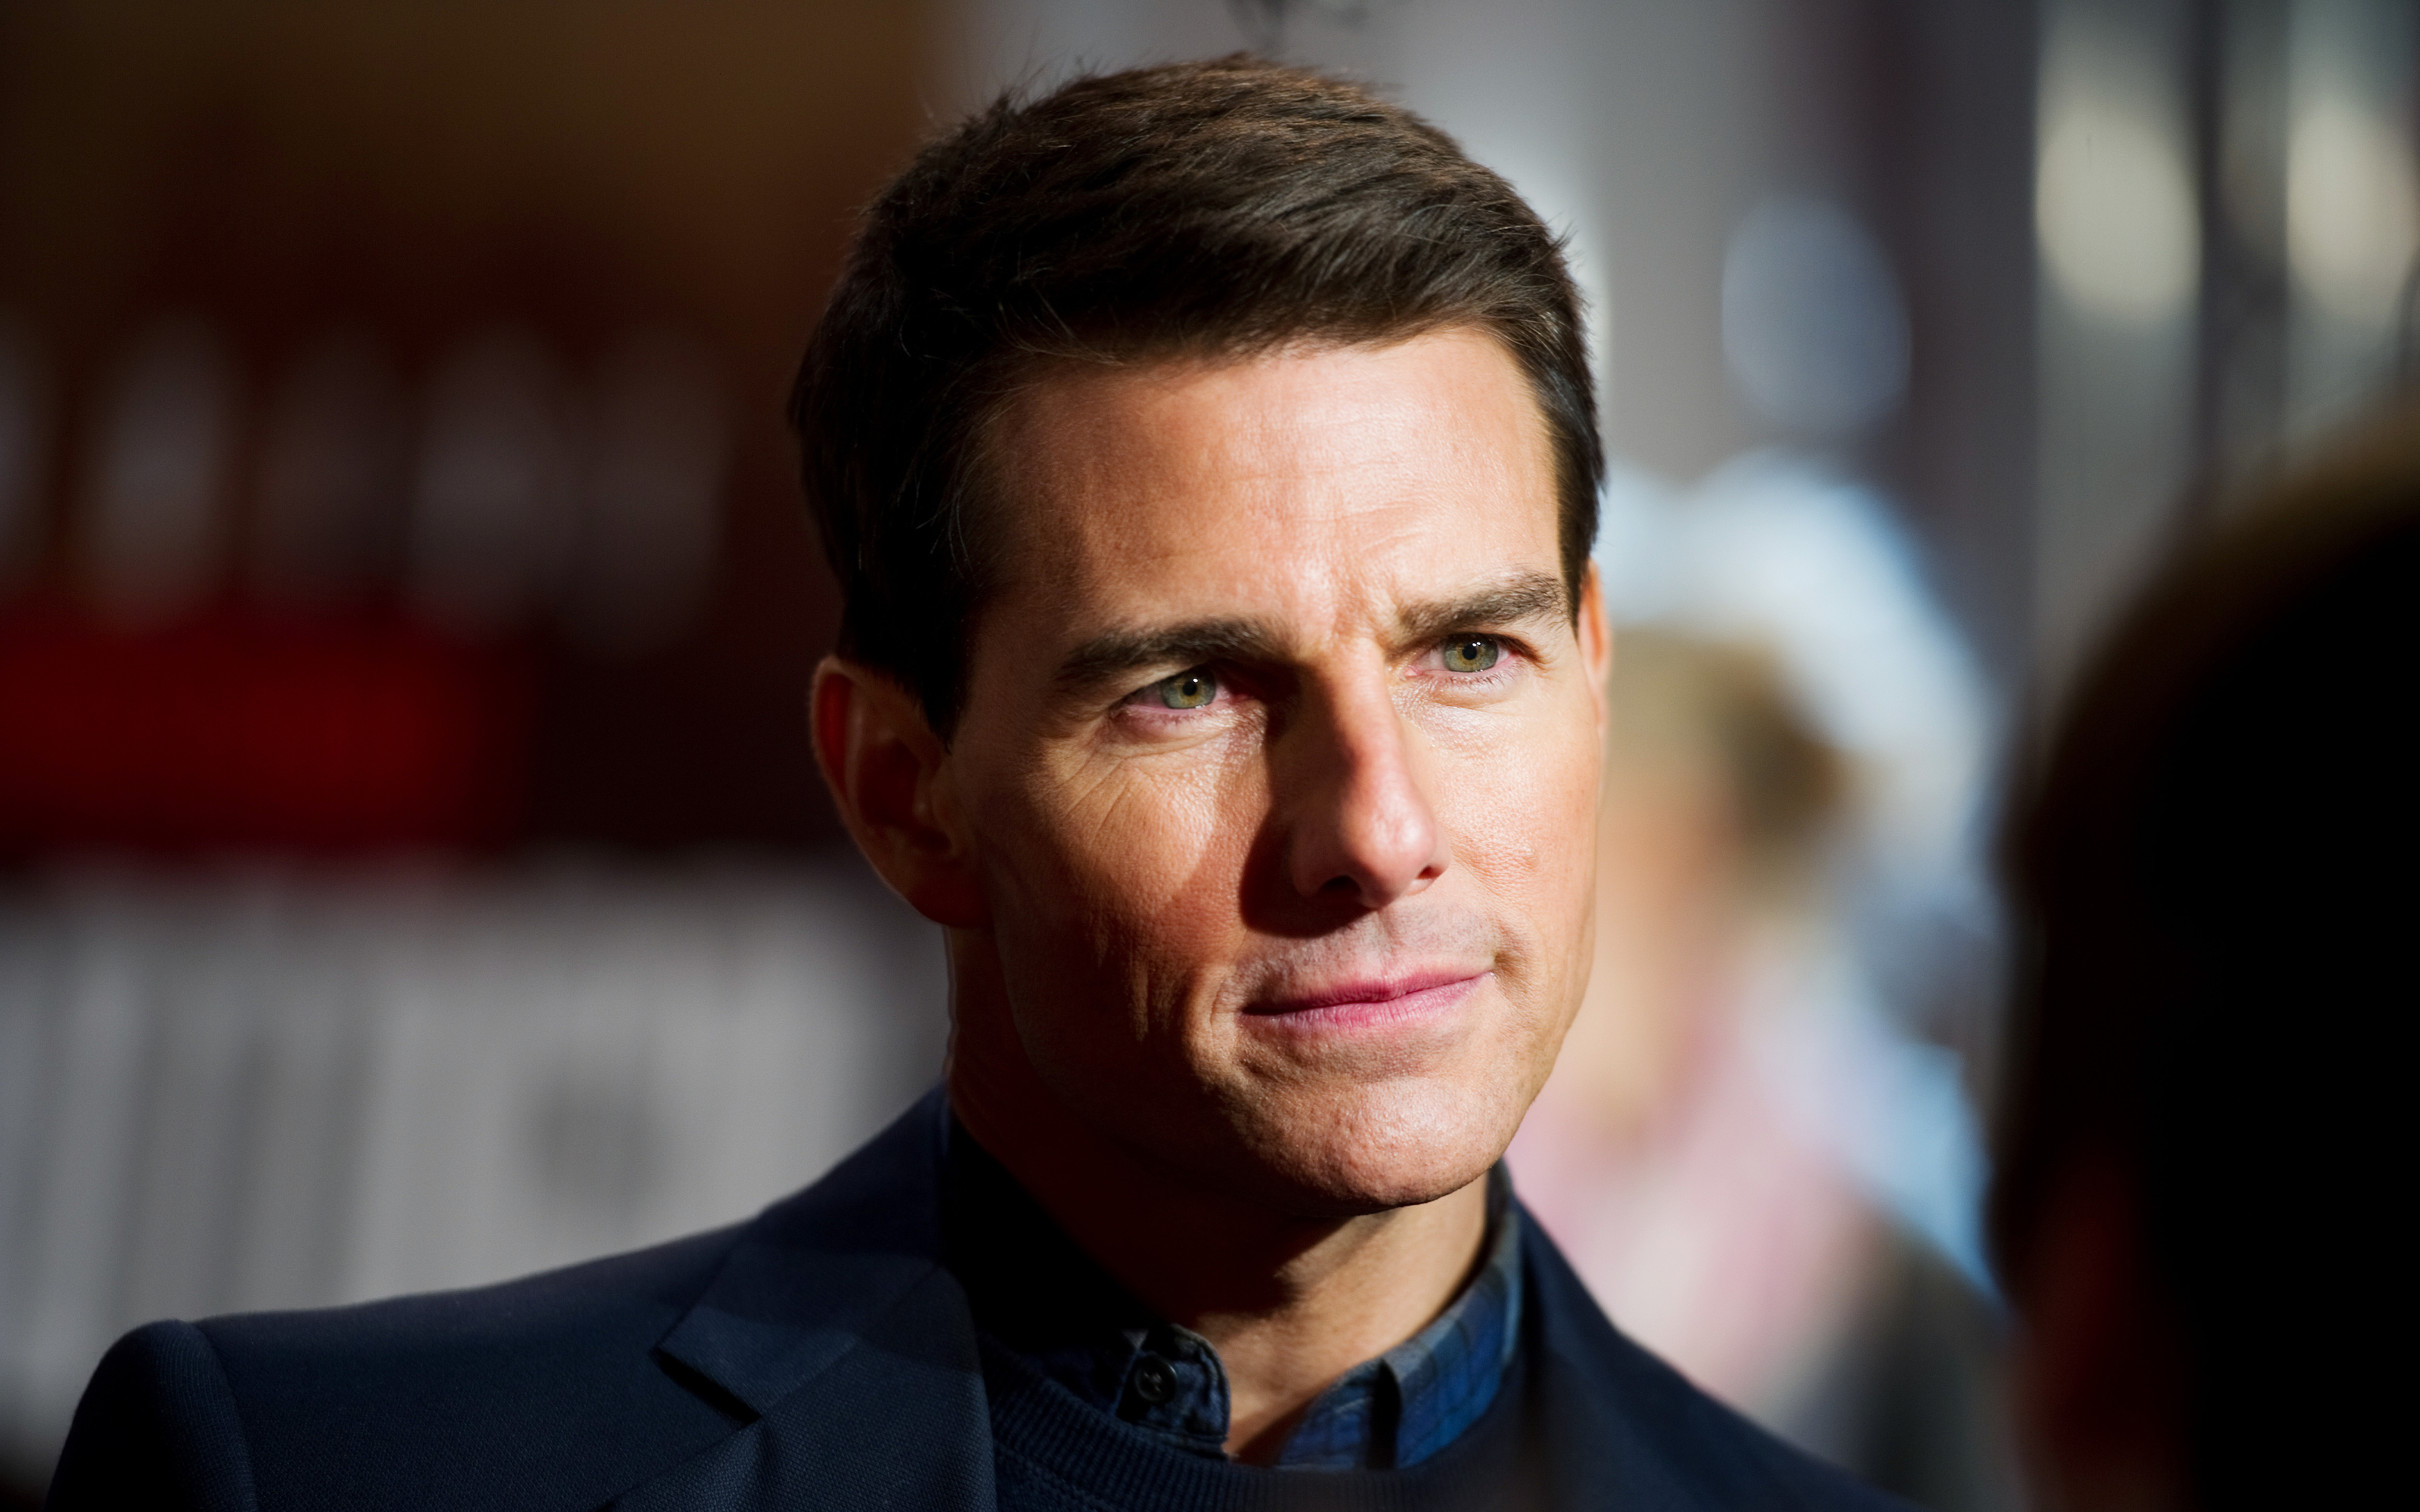 Celebrity Tom Cruise HD Wallpaper Background Image. 